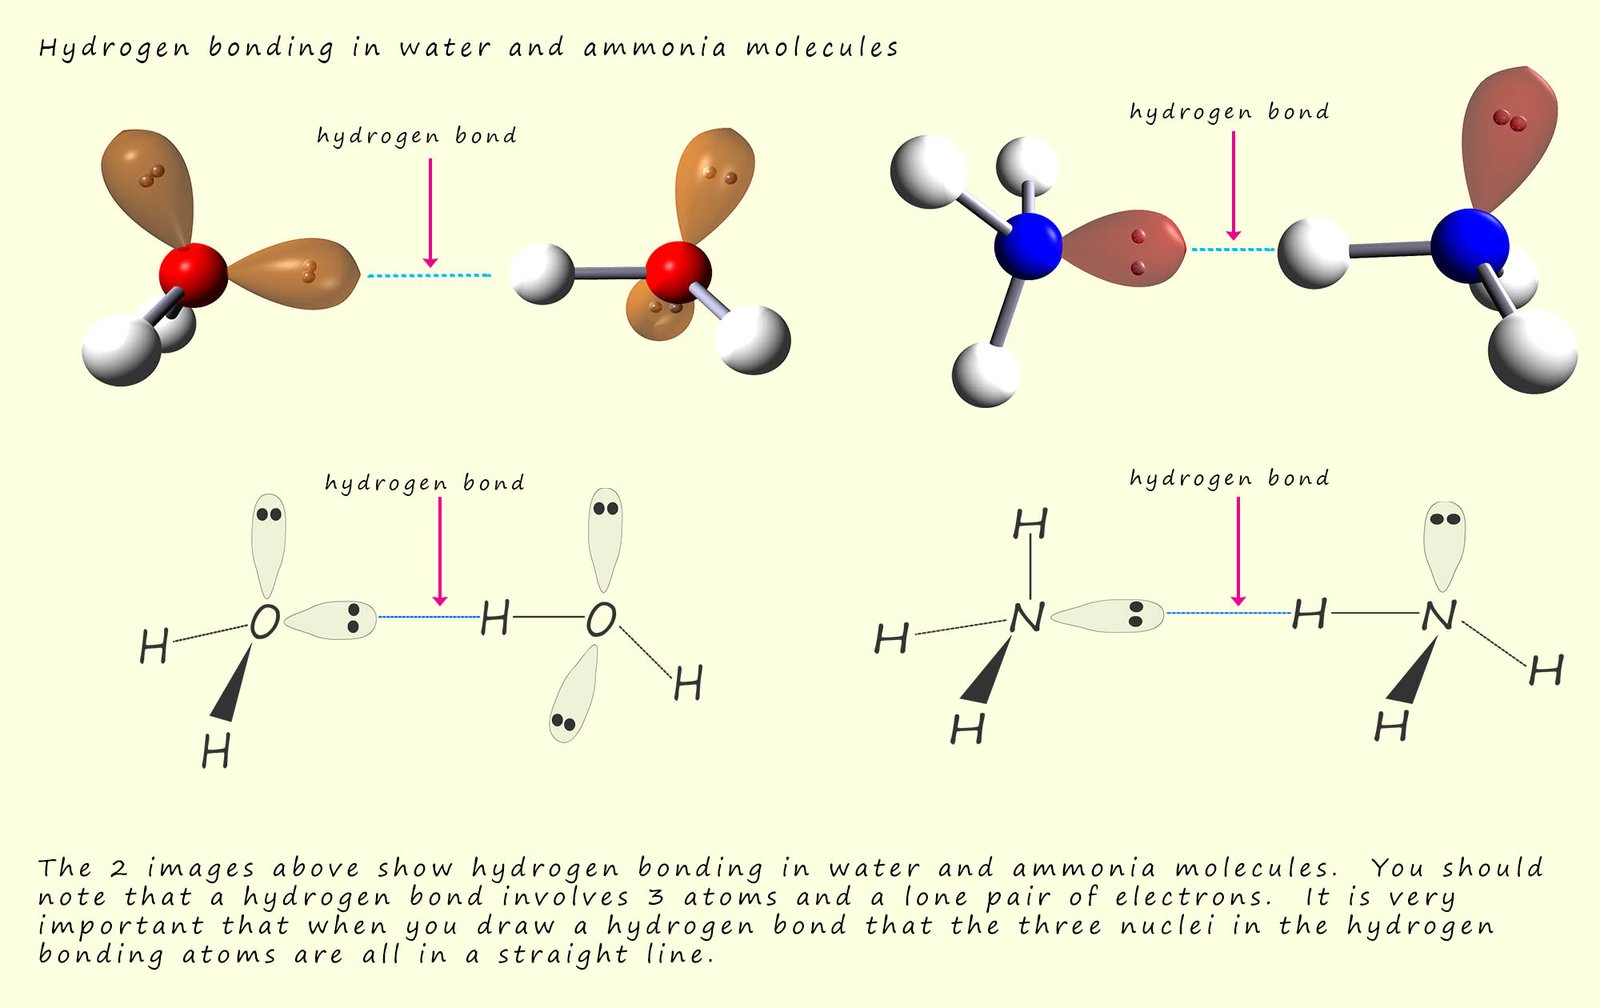 Diagram showing hydrogen bonding in water and ammonia molecules.  It is important that all the atoms and nuclei involved in forming the hydrogen bond are in a straight line.